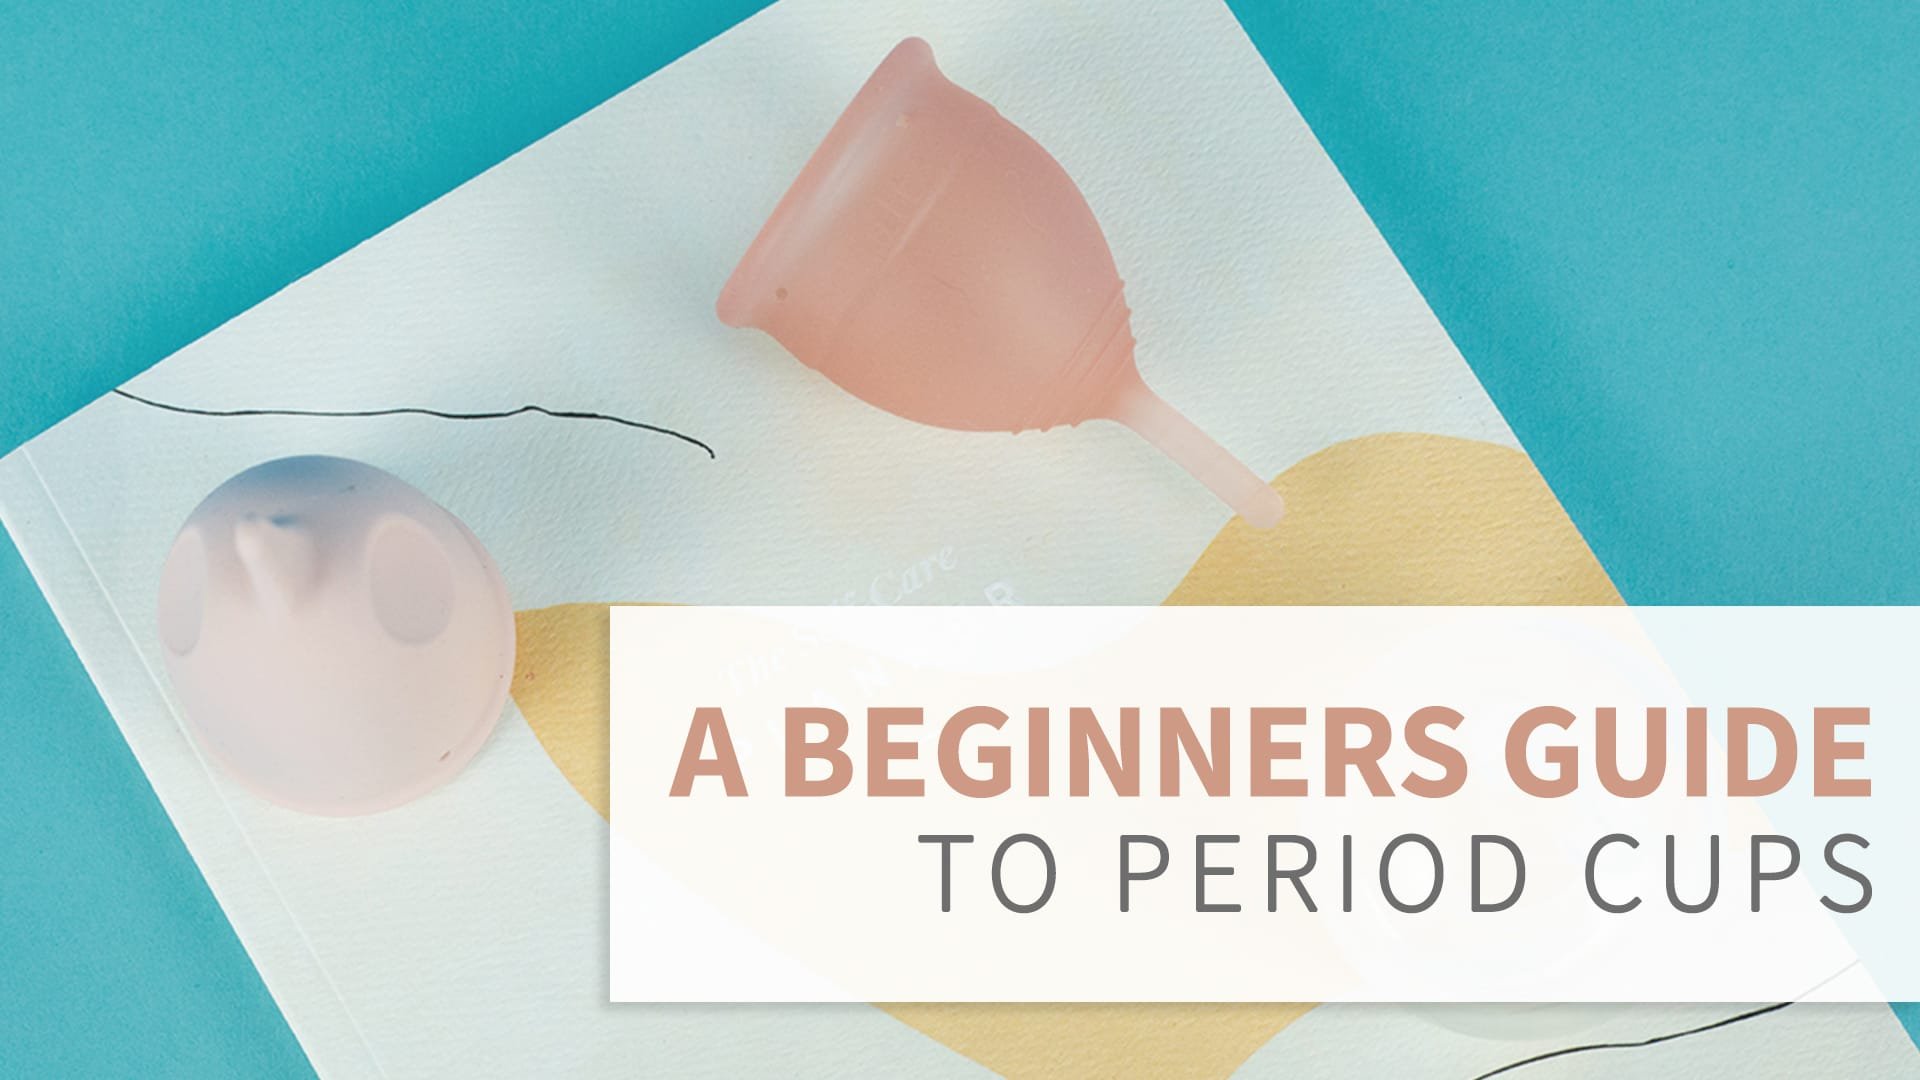 How Does a Menstrual Cup Work